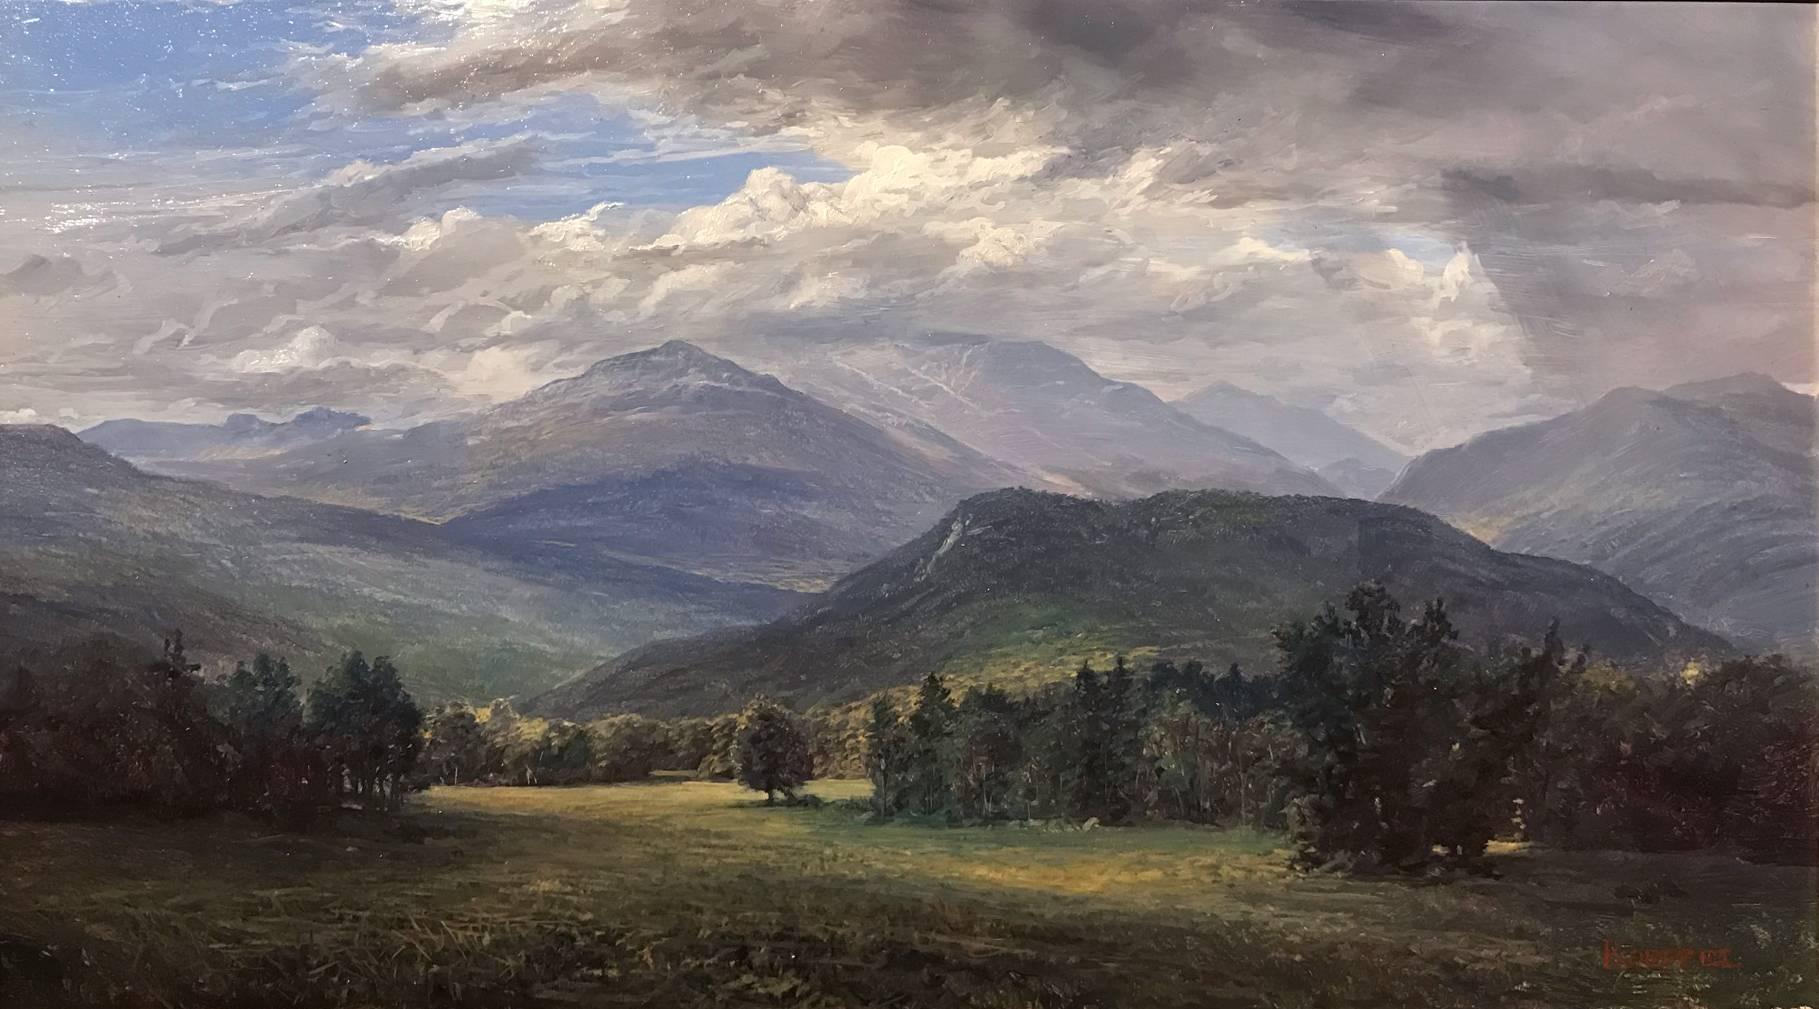 Mt. Washington Beneath The Clouds - Painting by Erik Koeppel